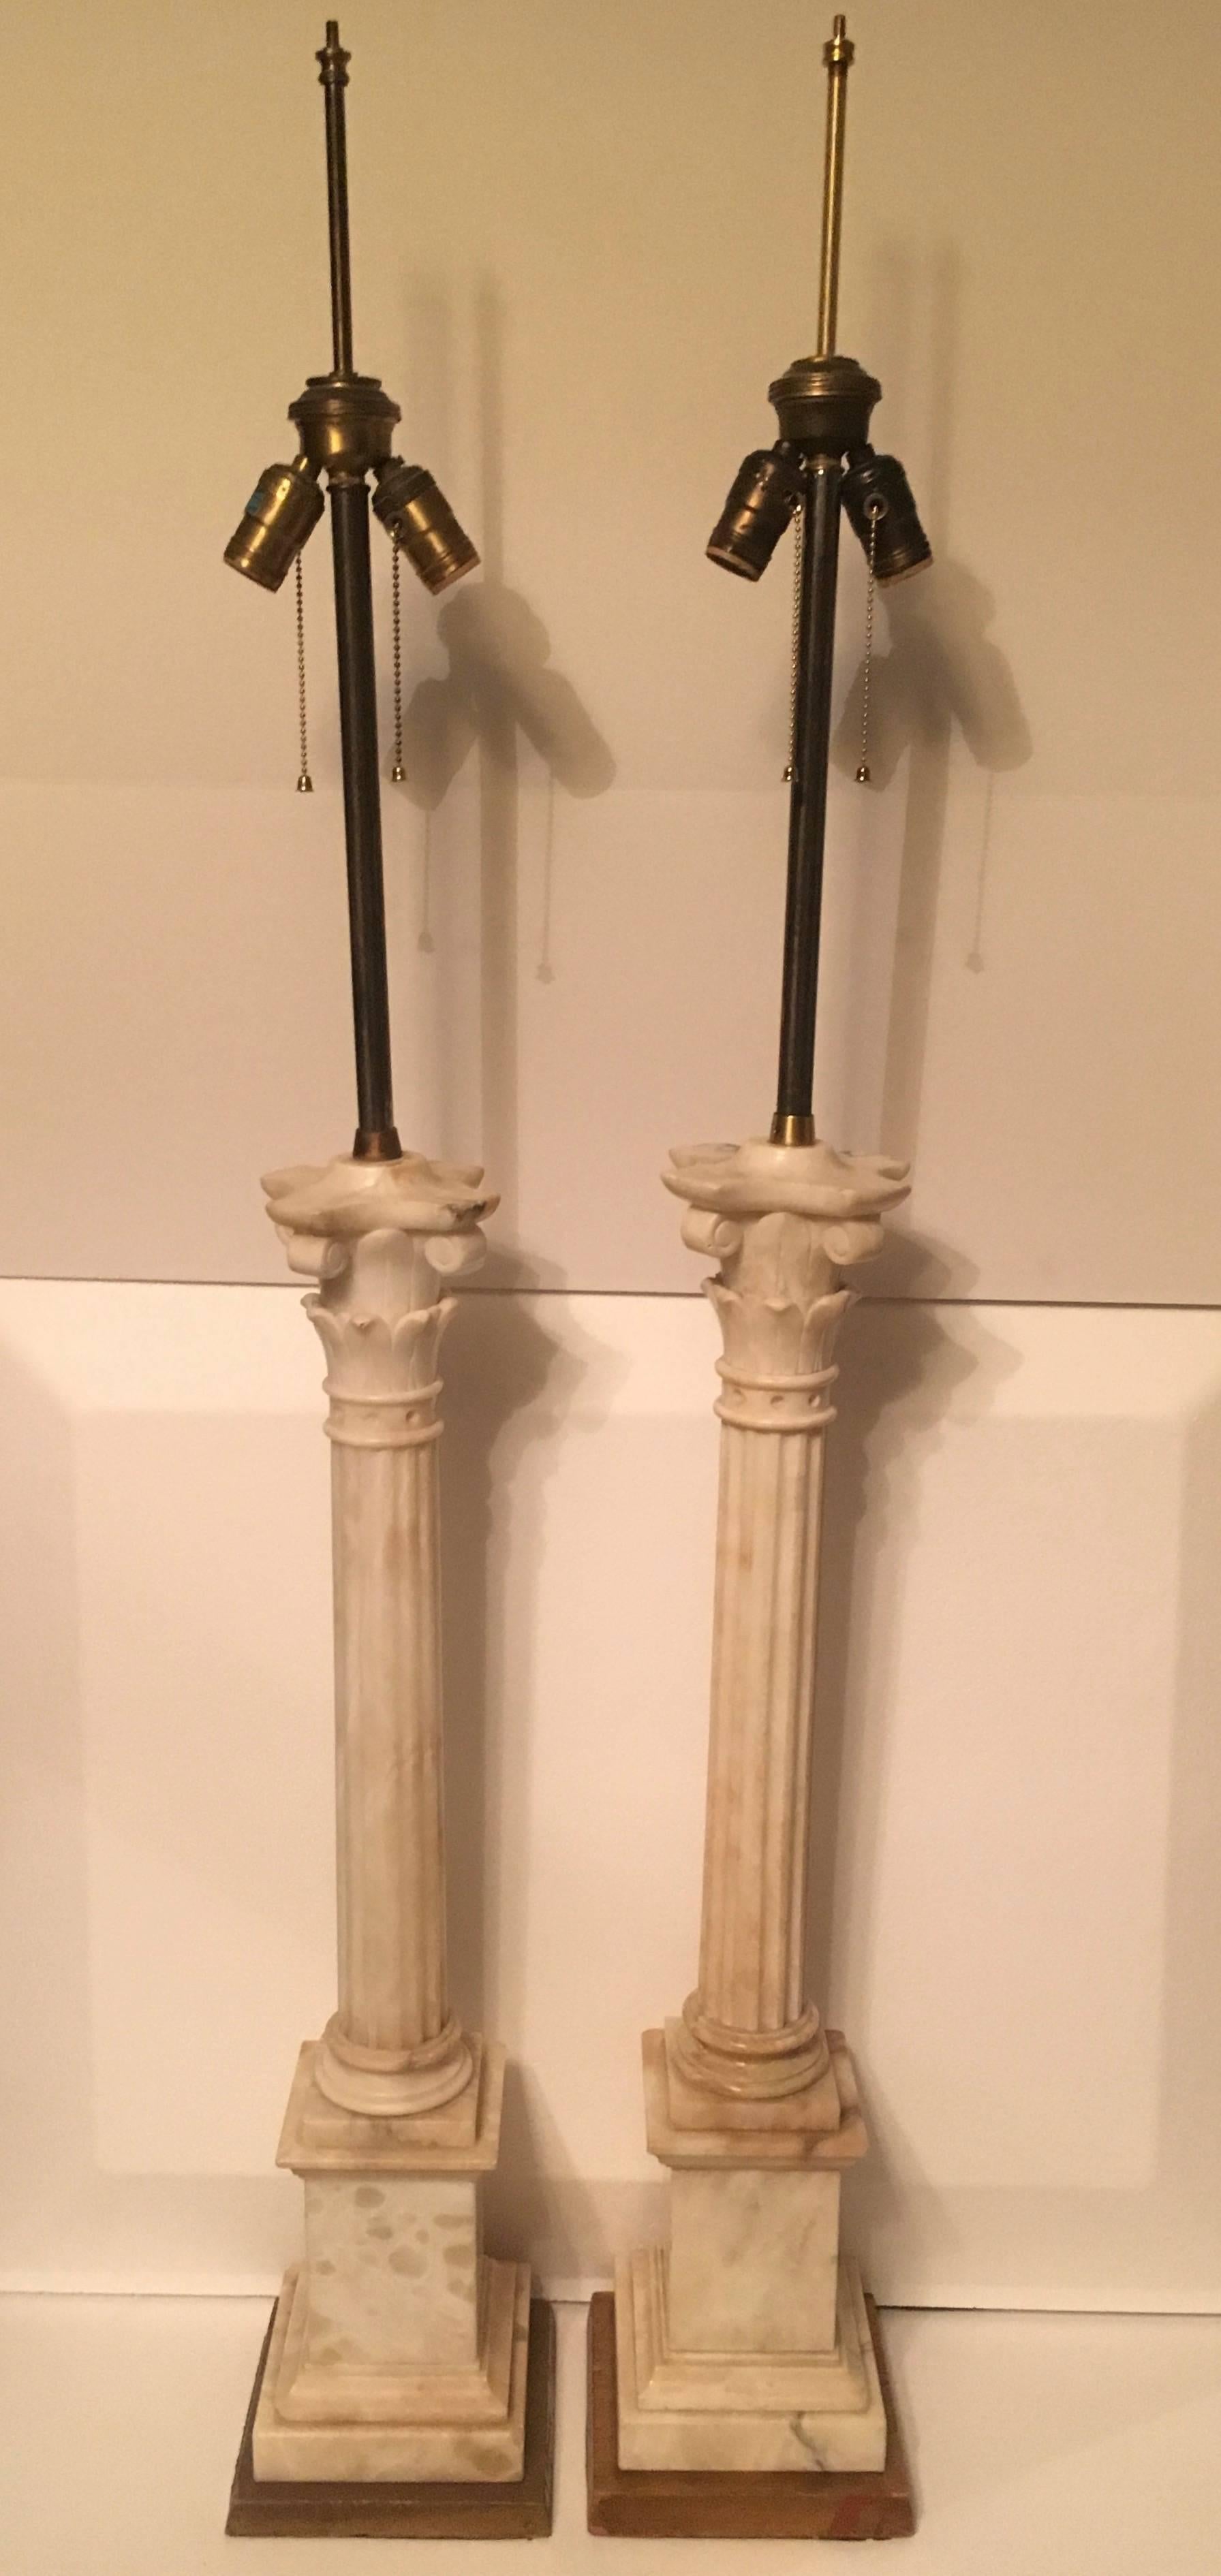 Pair of Marble column lamps on gold leaf base - the lamps are 54